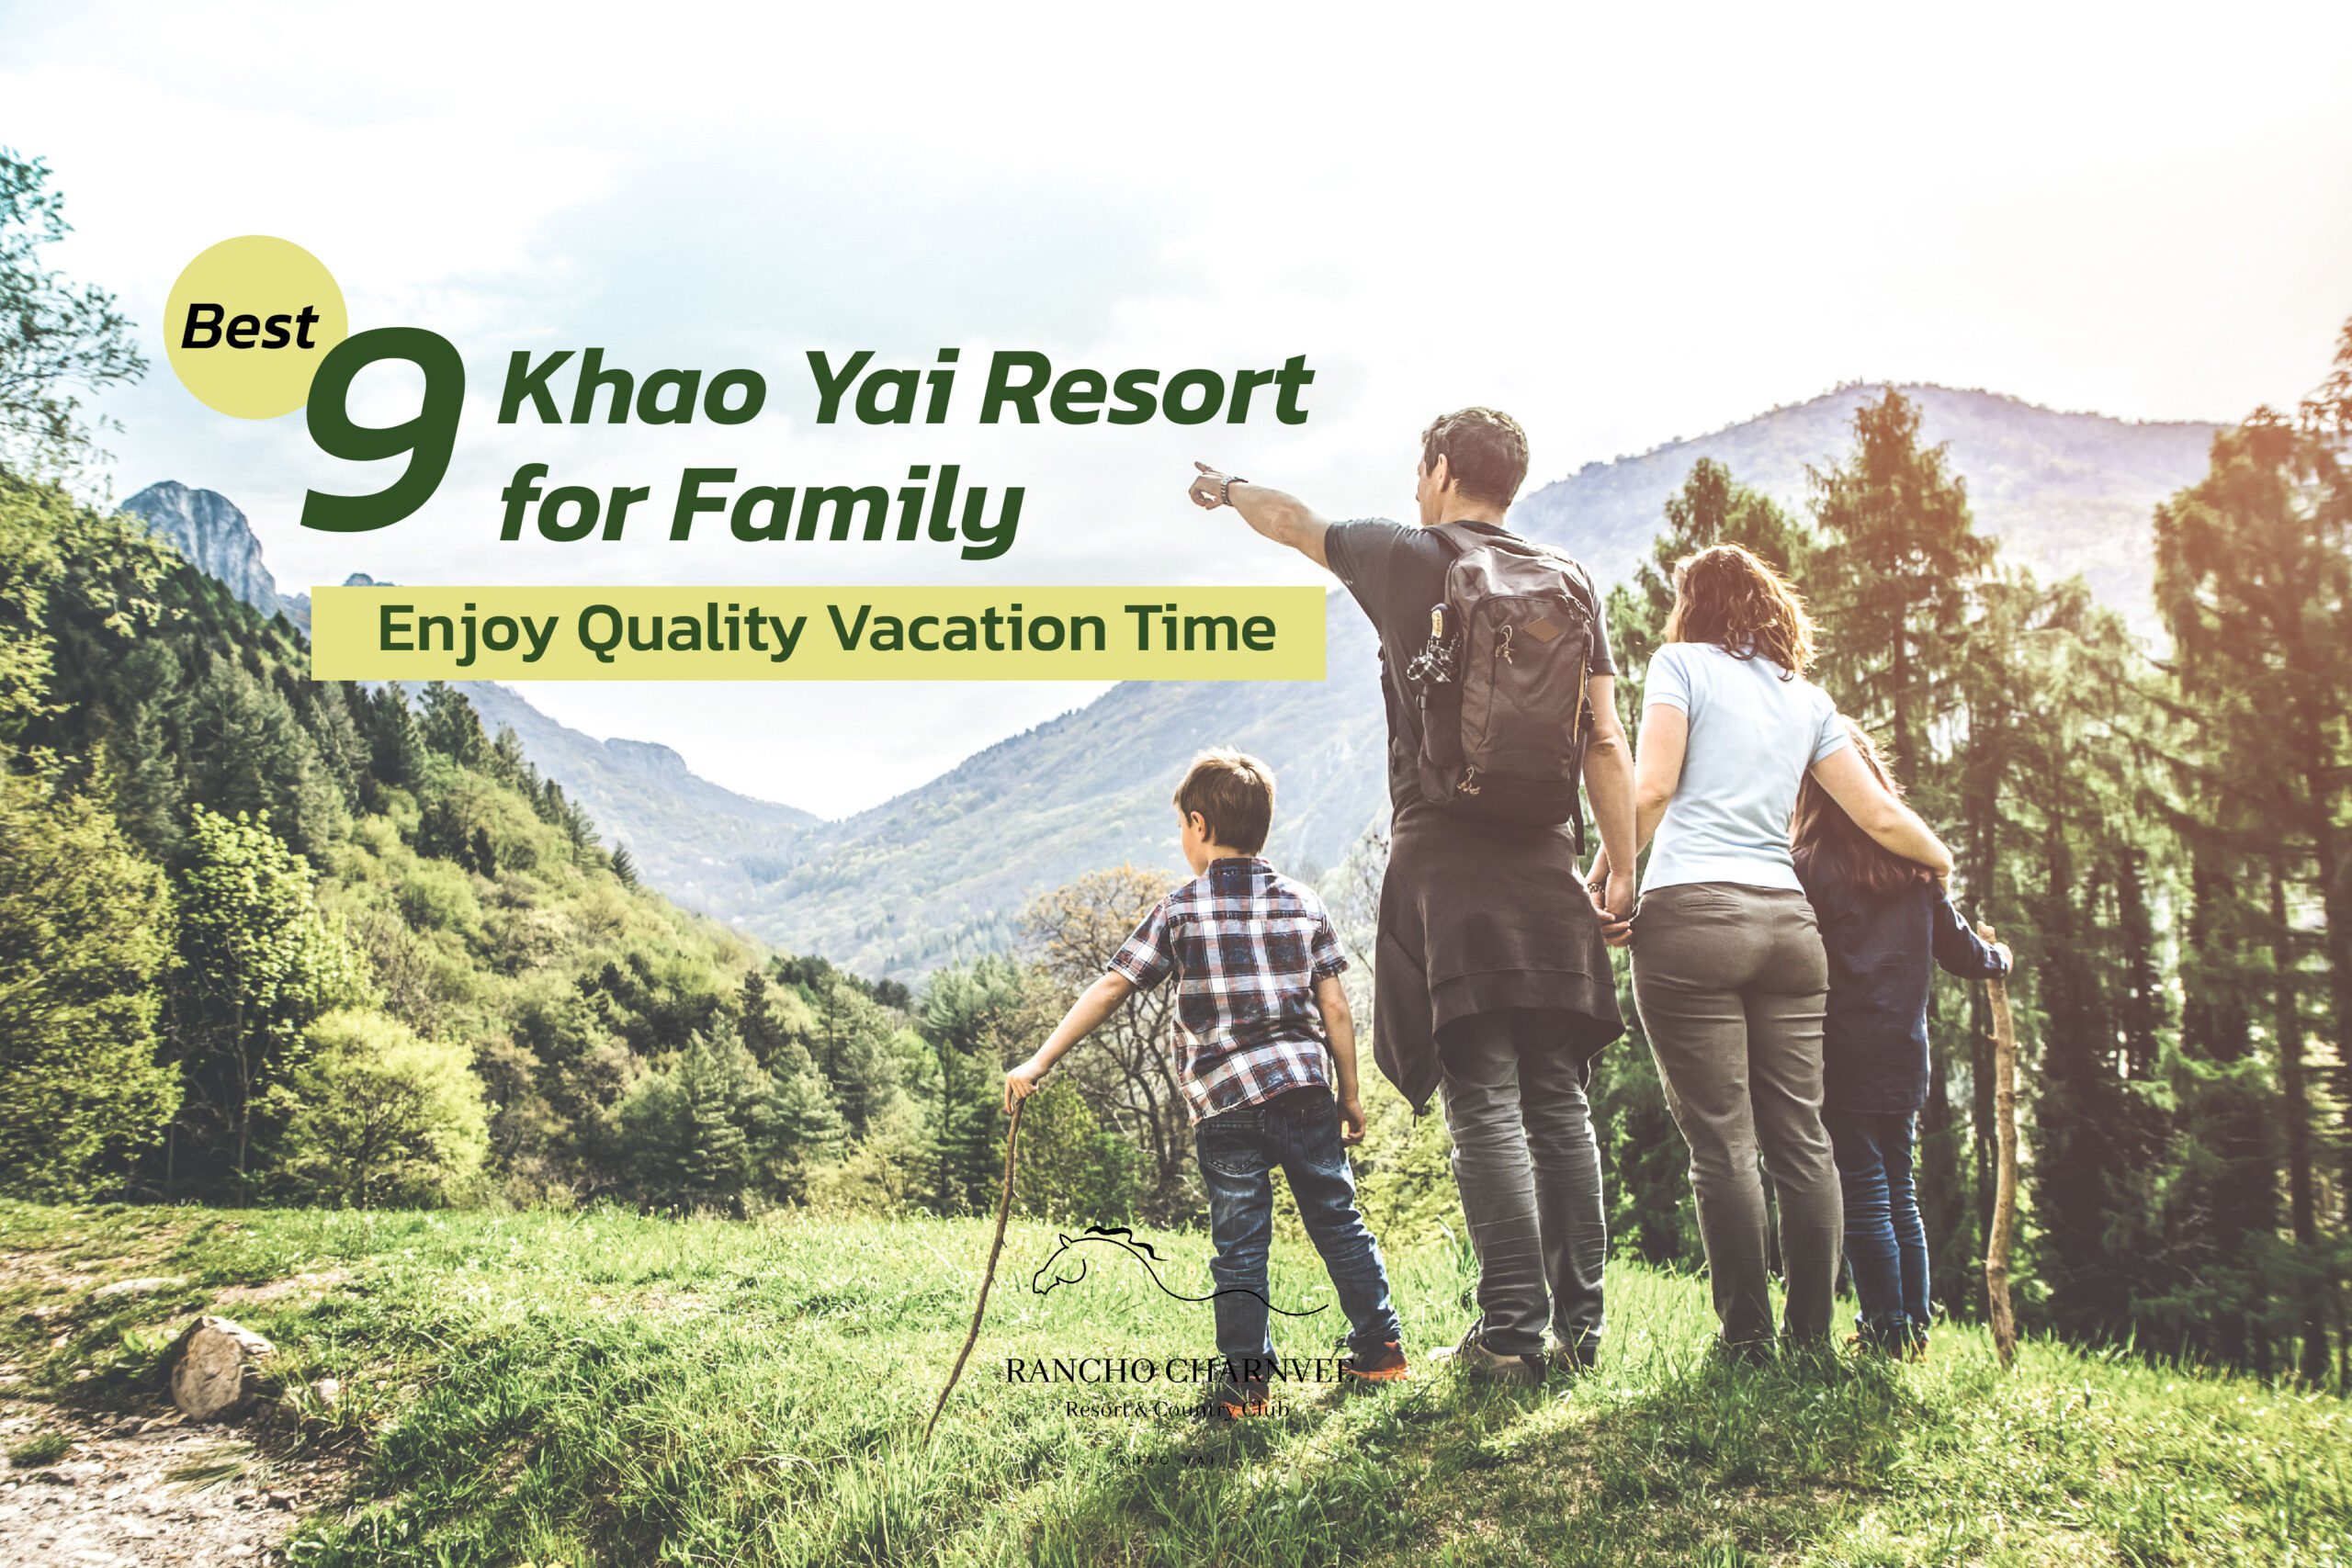 Best 9 Khao Yai Resort for Family: Enjoy Quality Vacation Time